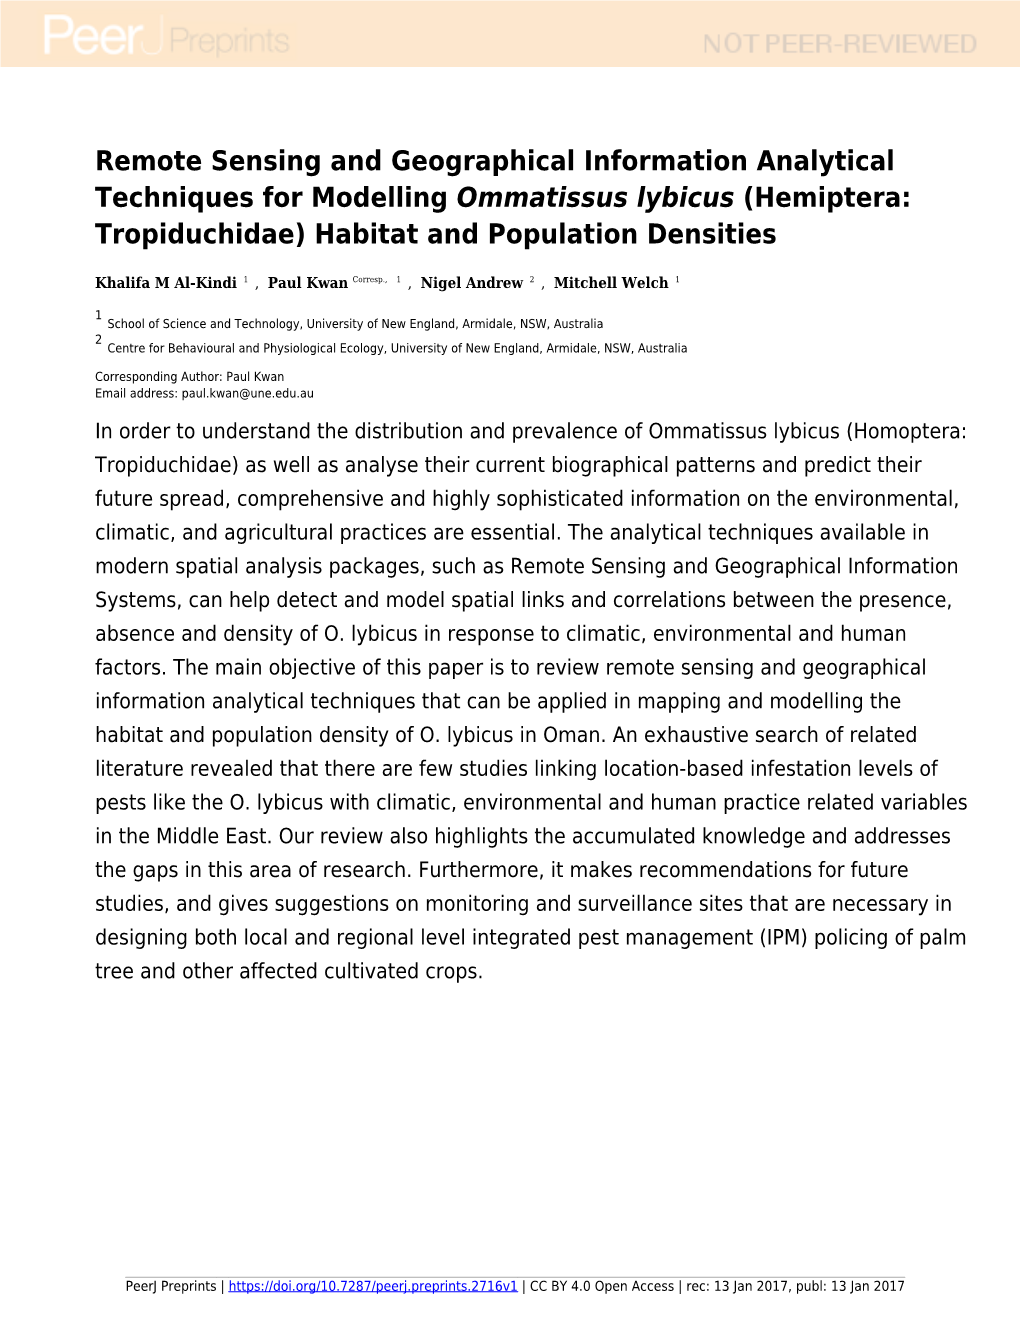 Remote Sensing and Geographical Information Analytical Techniques for Modelling Ommatissus Lybicus (Hemiptera: Tropiduchidae) Habitat and Population Densities